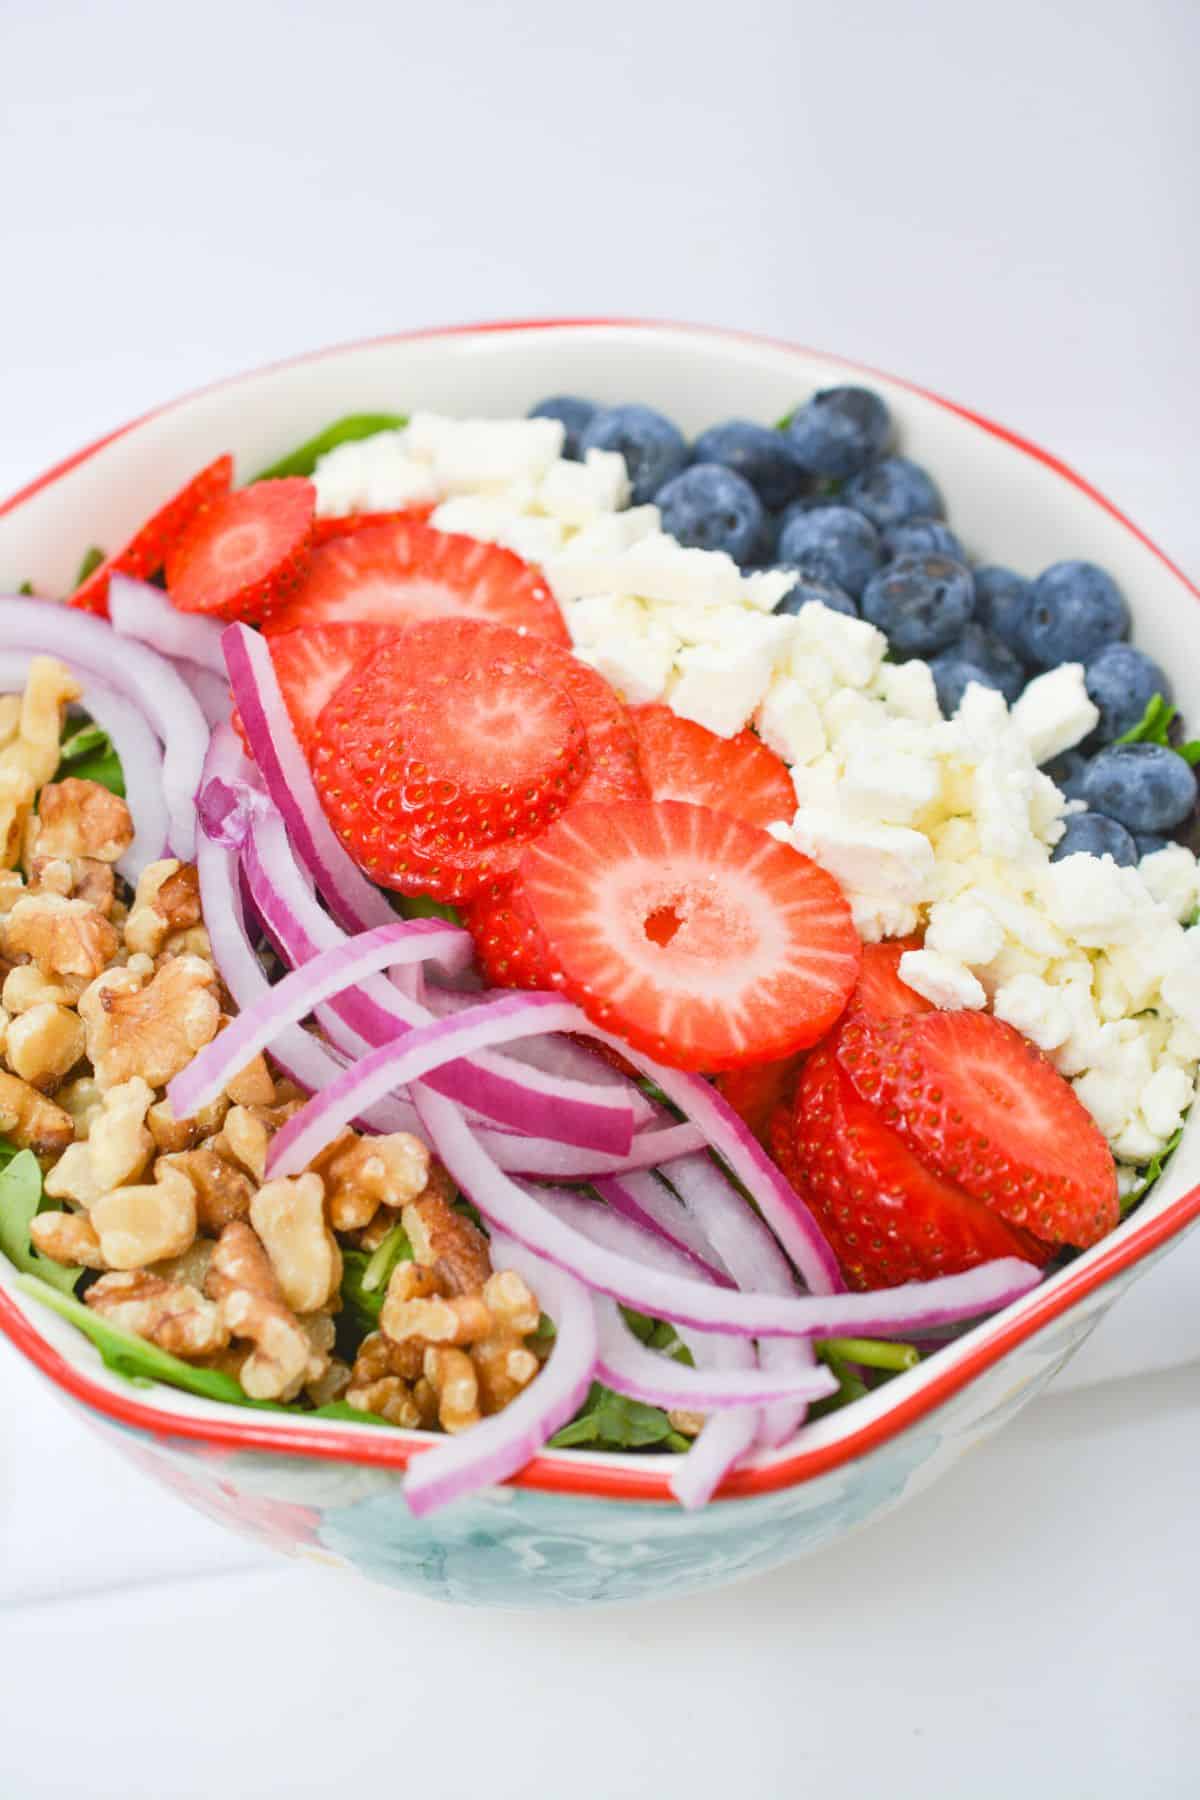 A salad with strawberries, blueberries and walnuts.